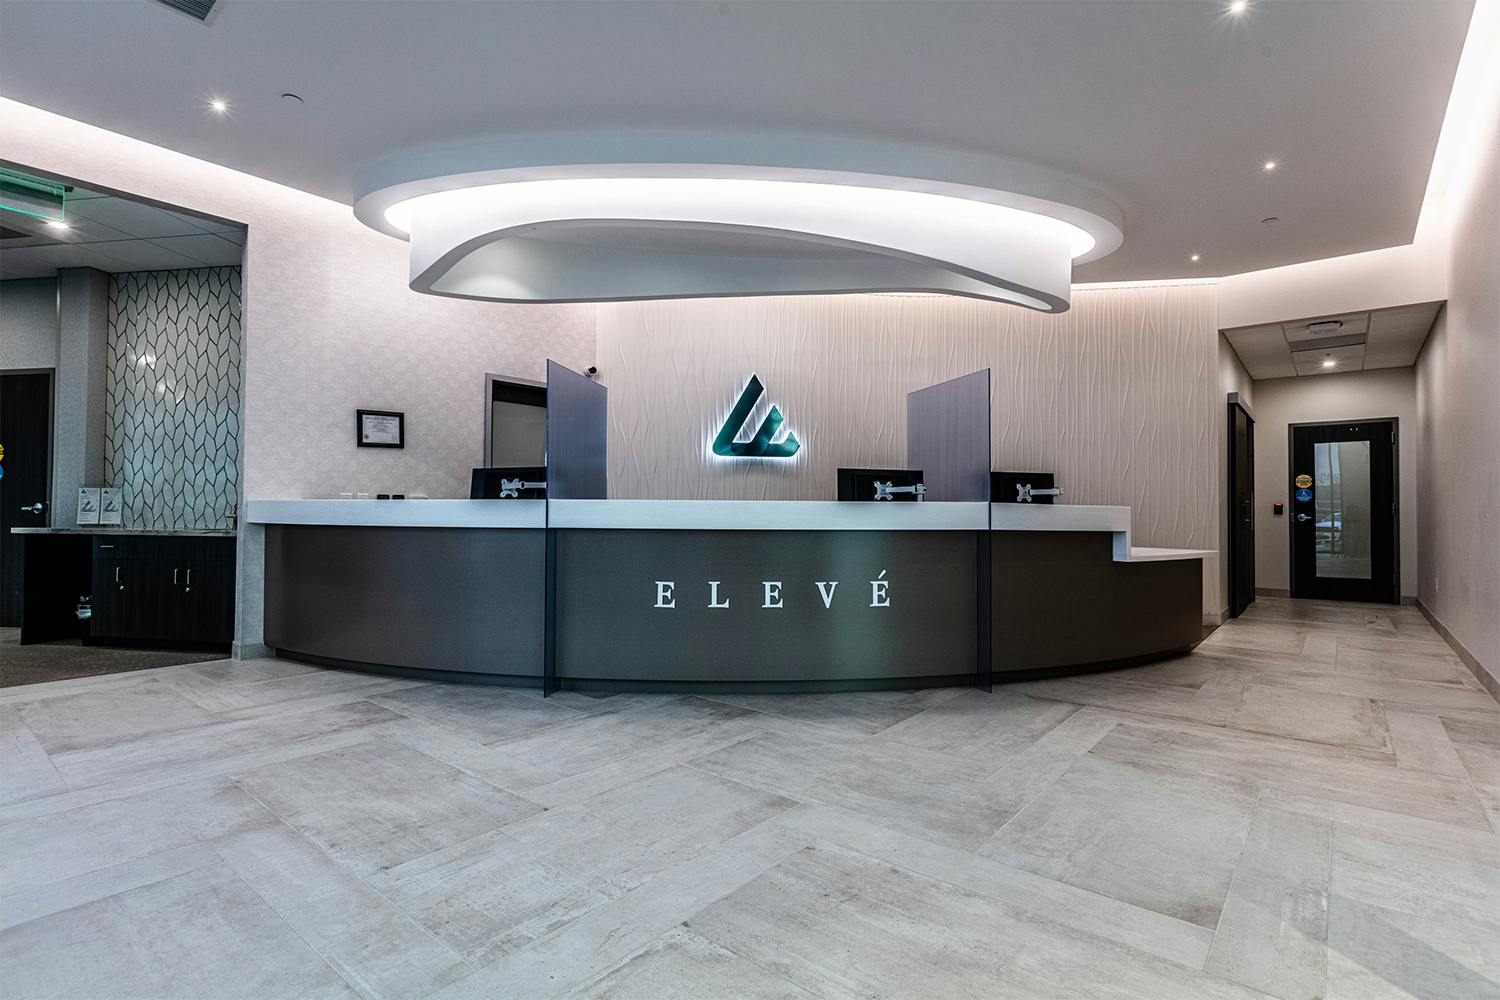 Eleve Receptionist desk and lobby